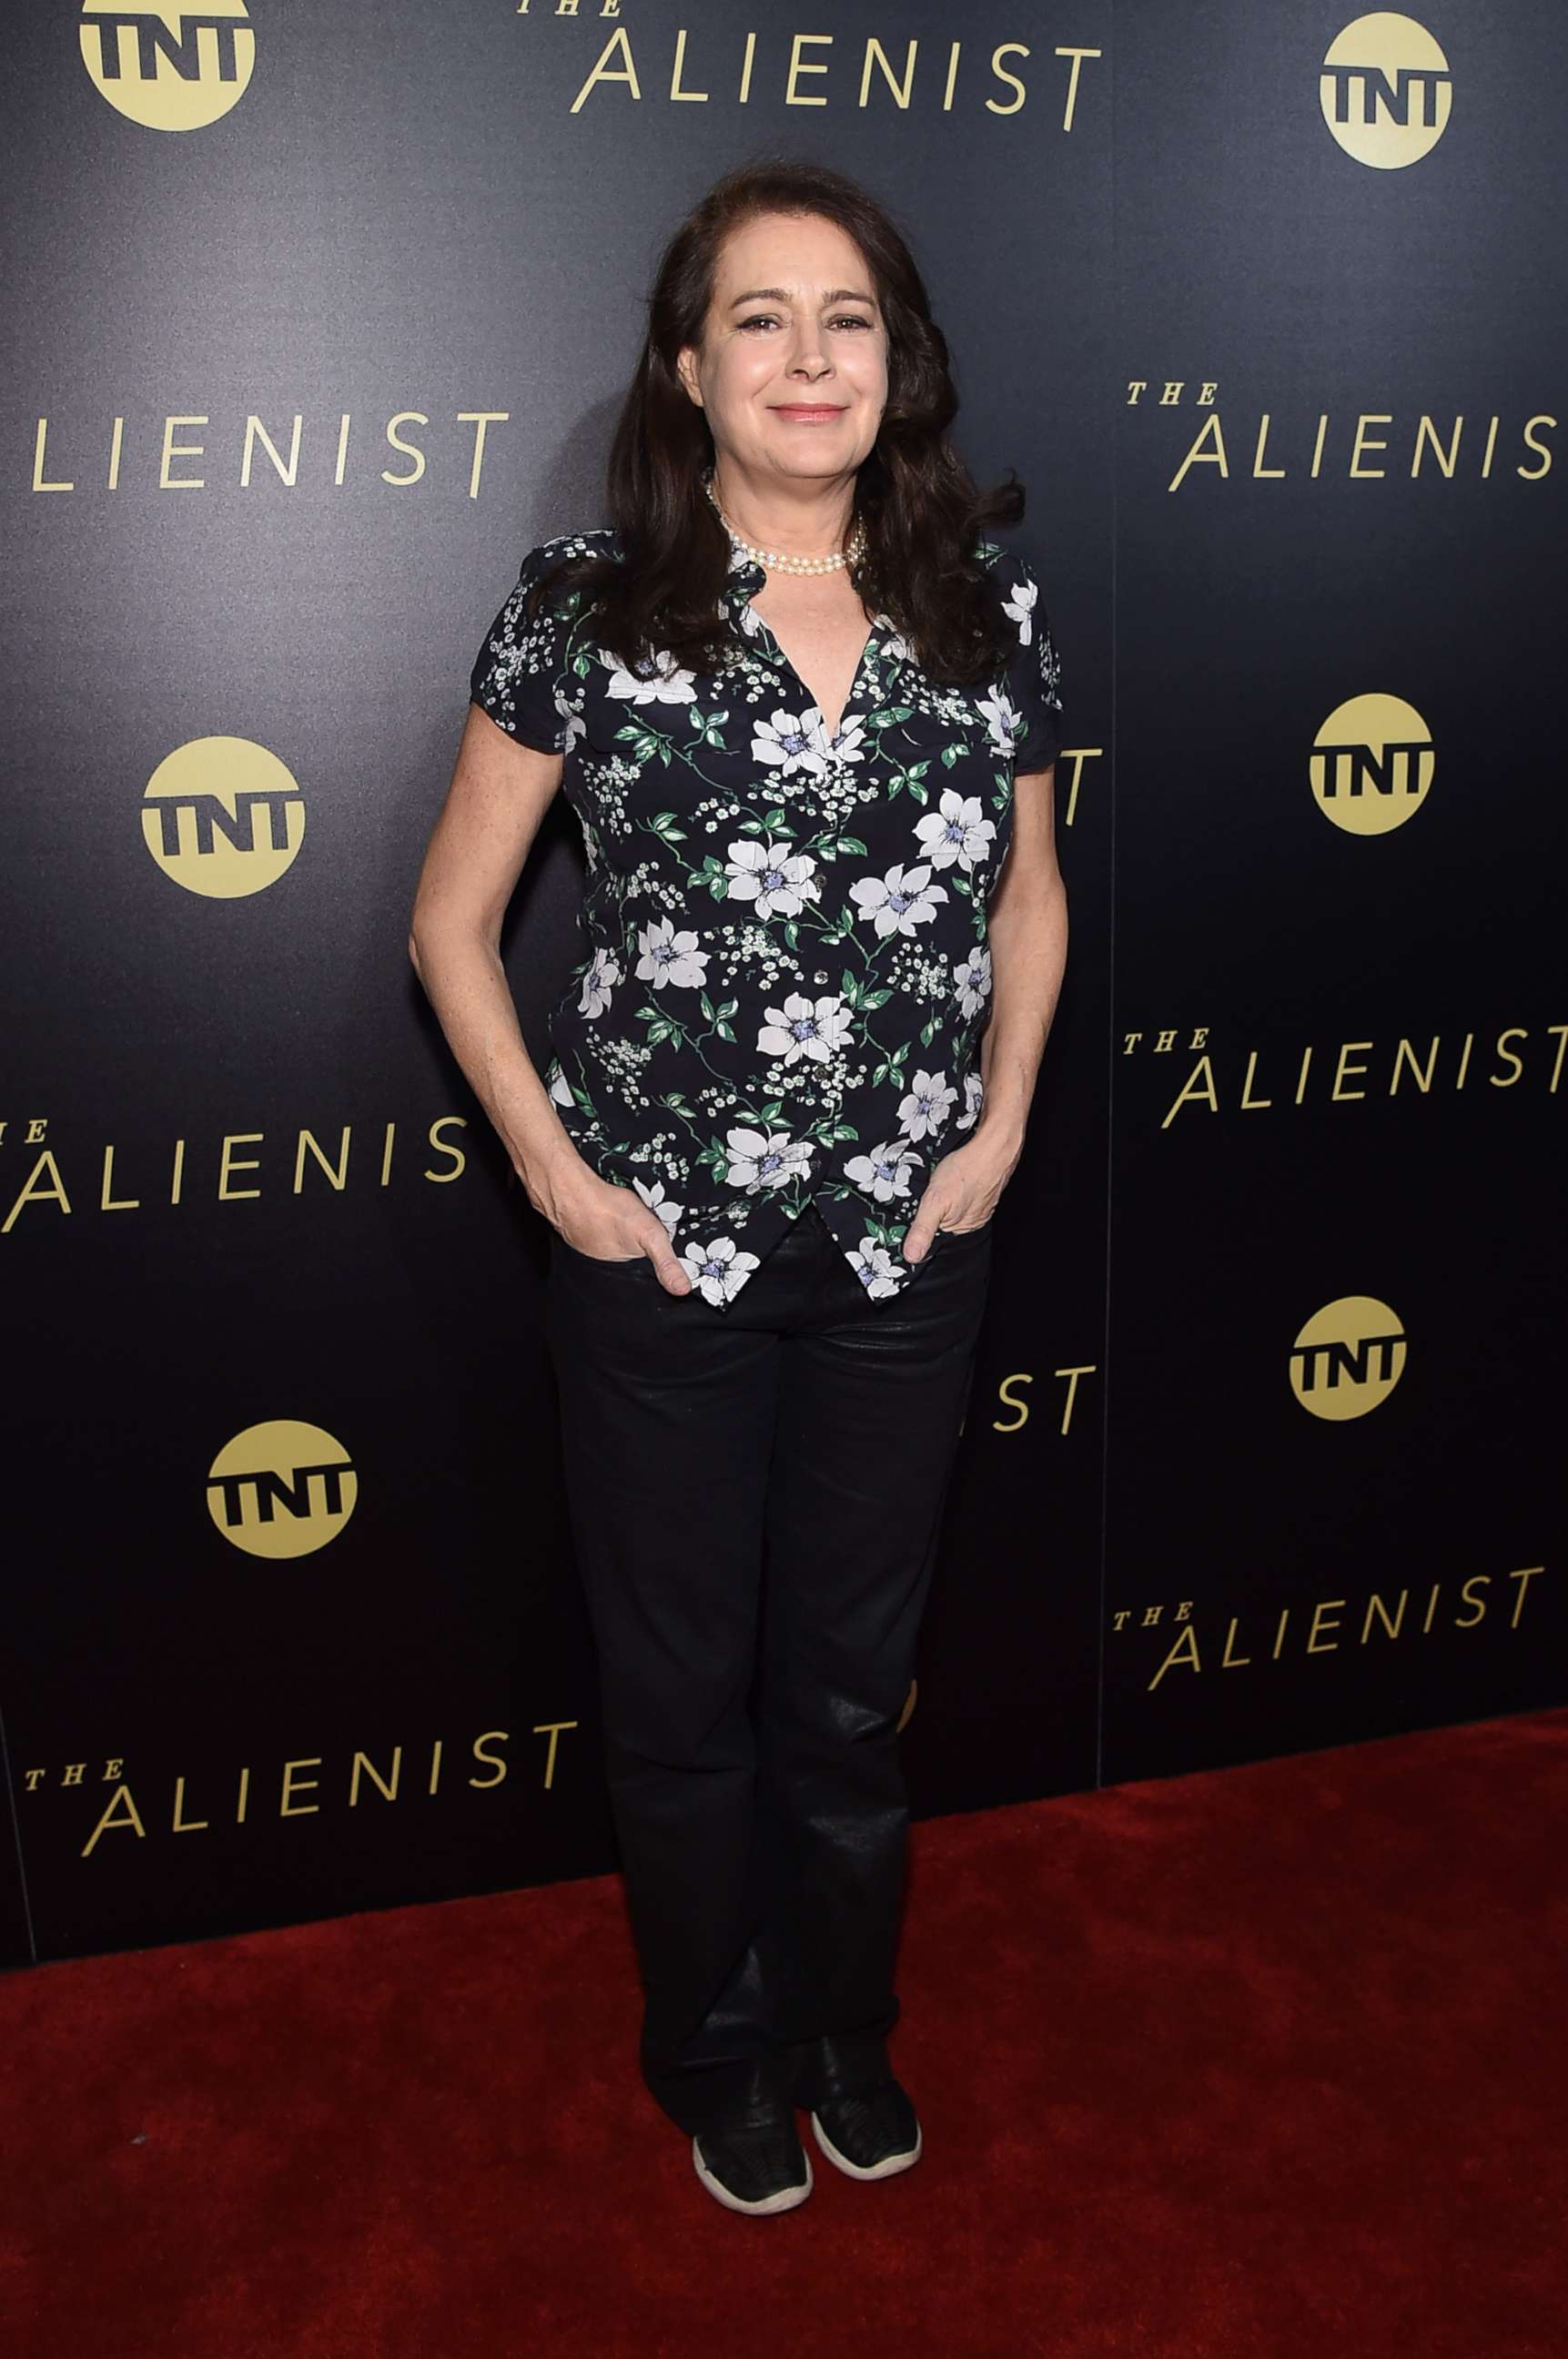 PHOTO: Sean Young attends the premiere of TNT's "The Alienist" at iPic Cinema, Jan. 16, 2018, in New York City.